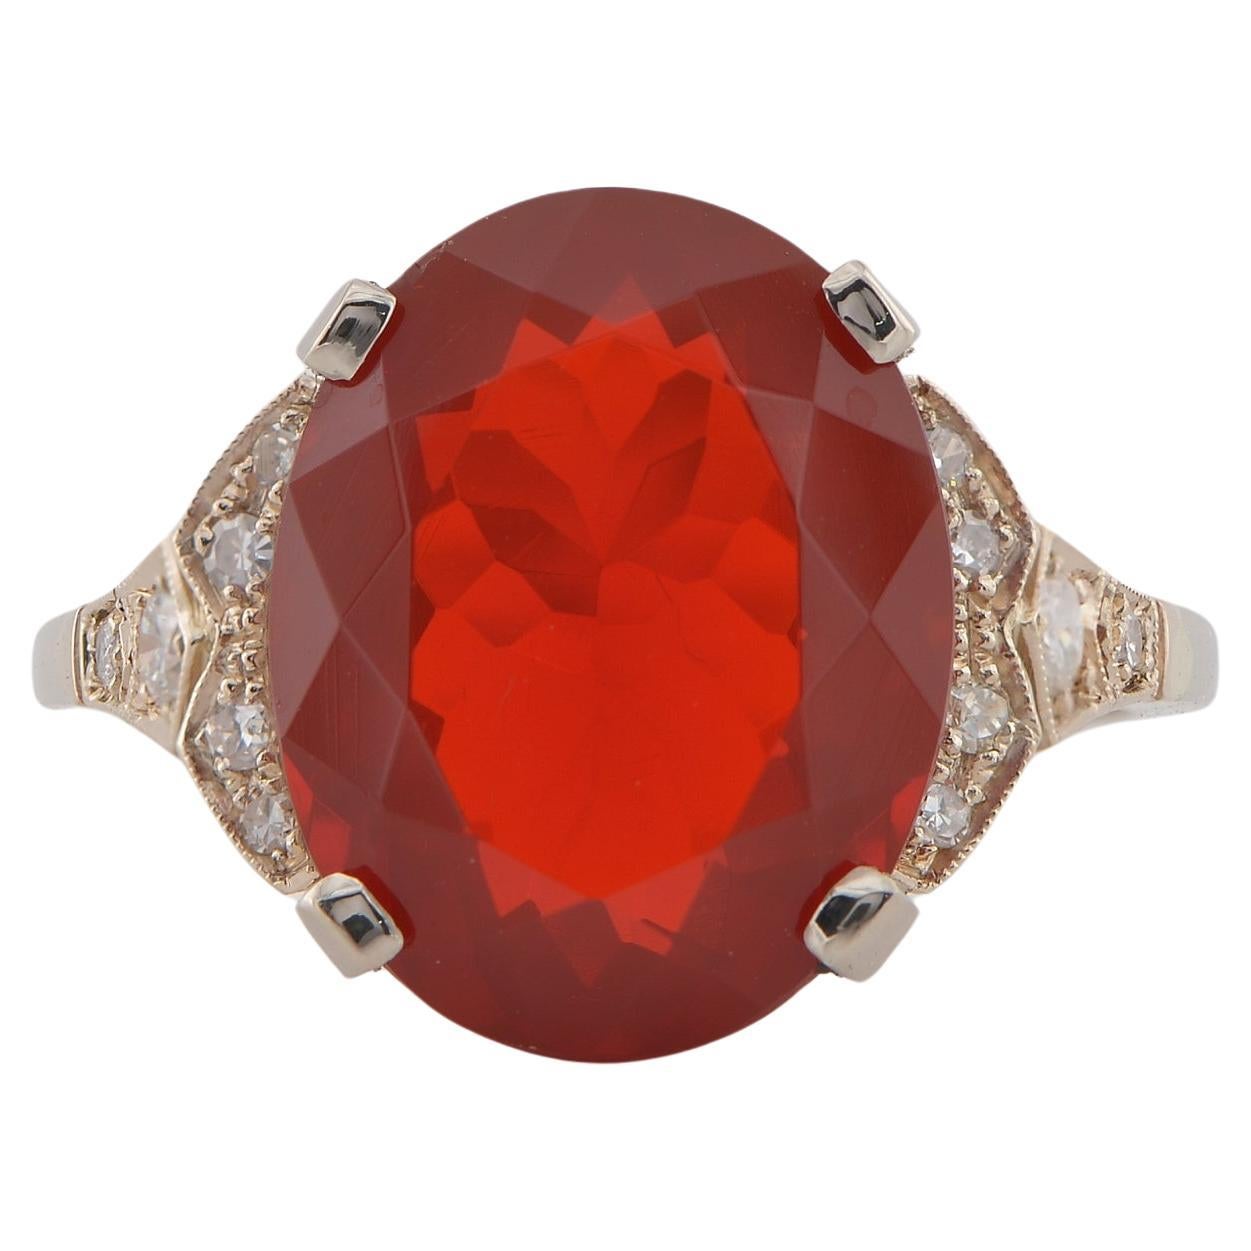 Vintage Style 6.0 Ct. Ruby Red Fire Opal Diamond Solitaire ring